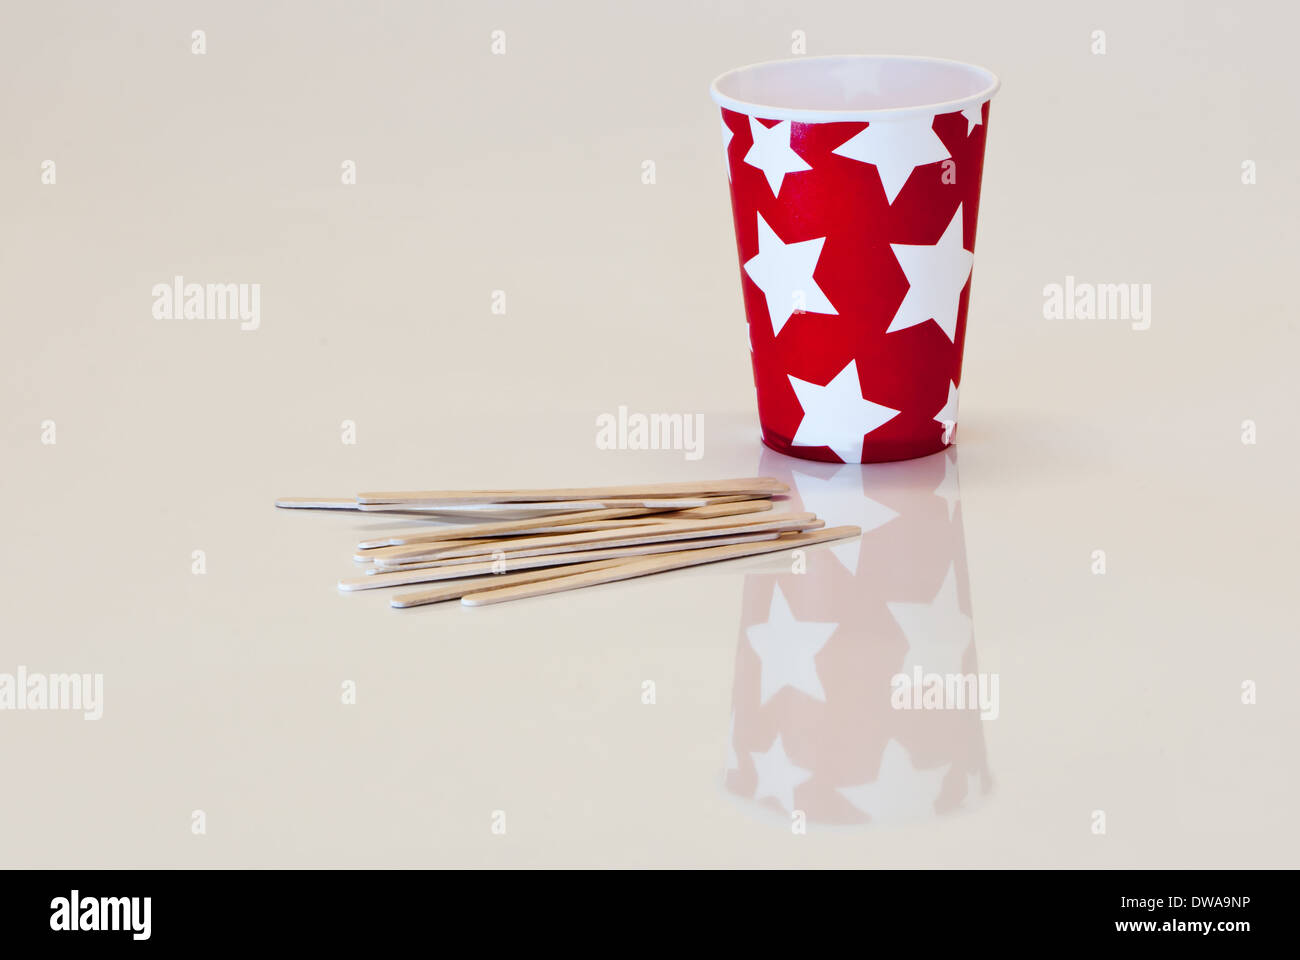 Empty Orange Cup Stirrer Placed On Stock Photo 1736543570